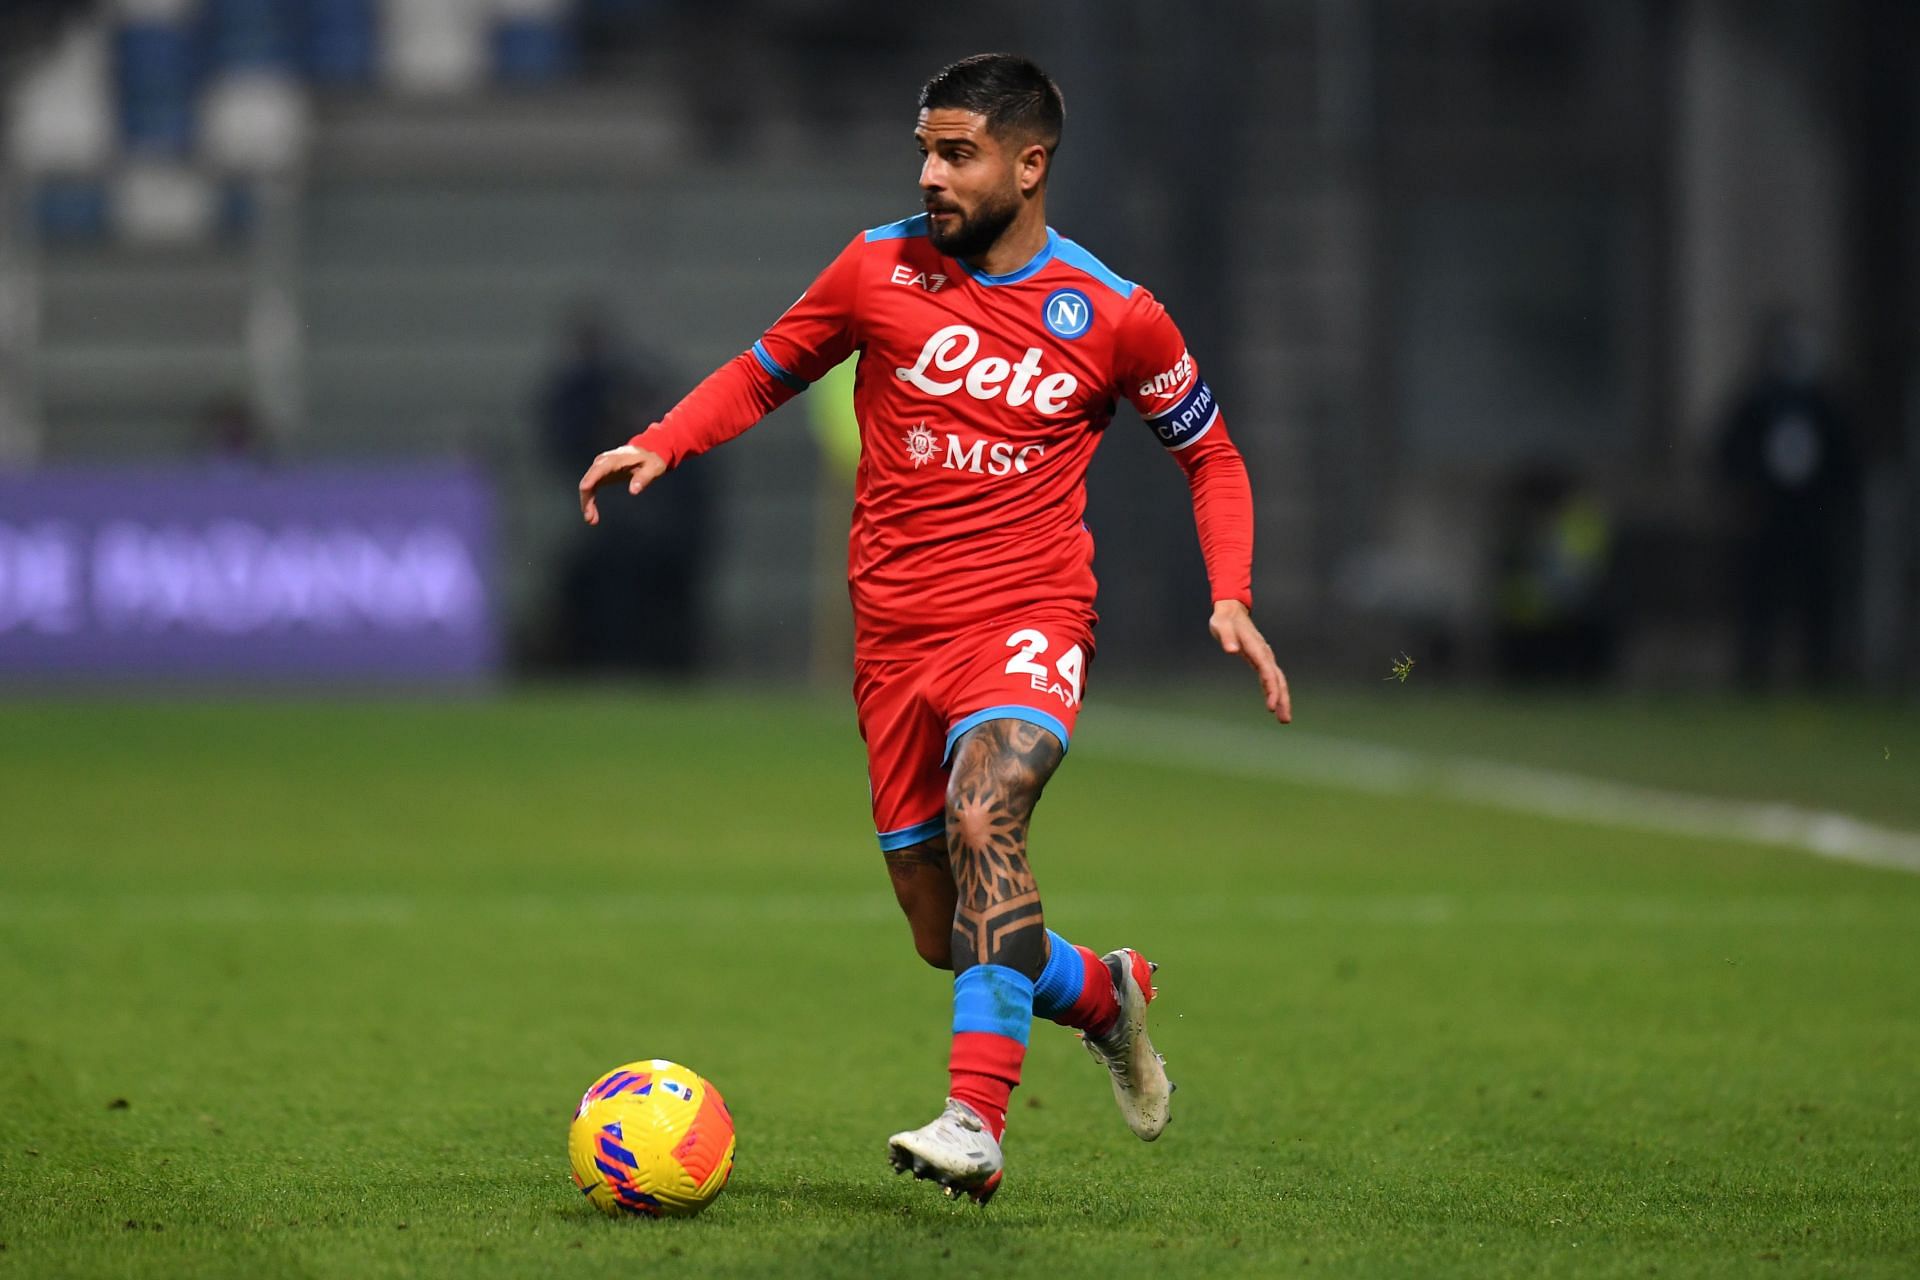 Italy star Lorenzo Insigne in action for Napoli